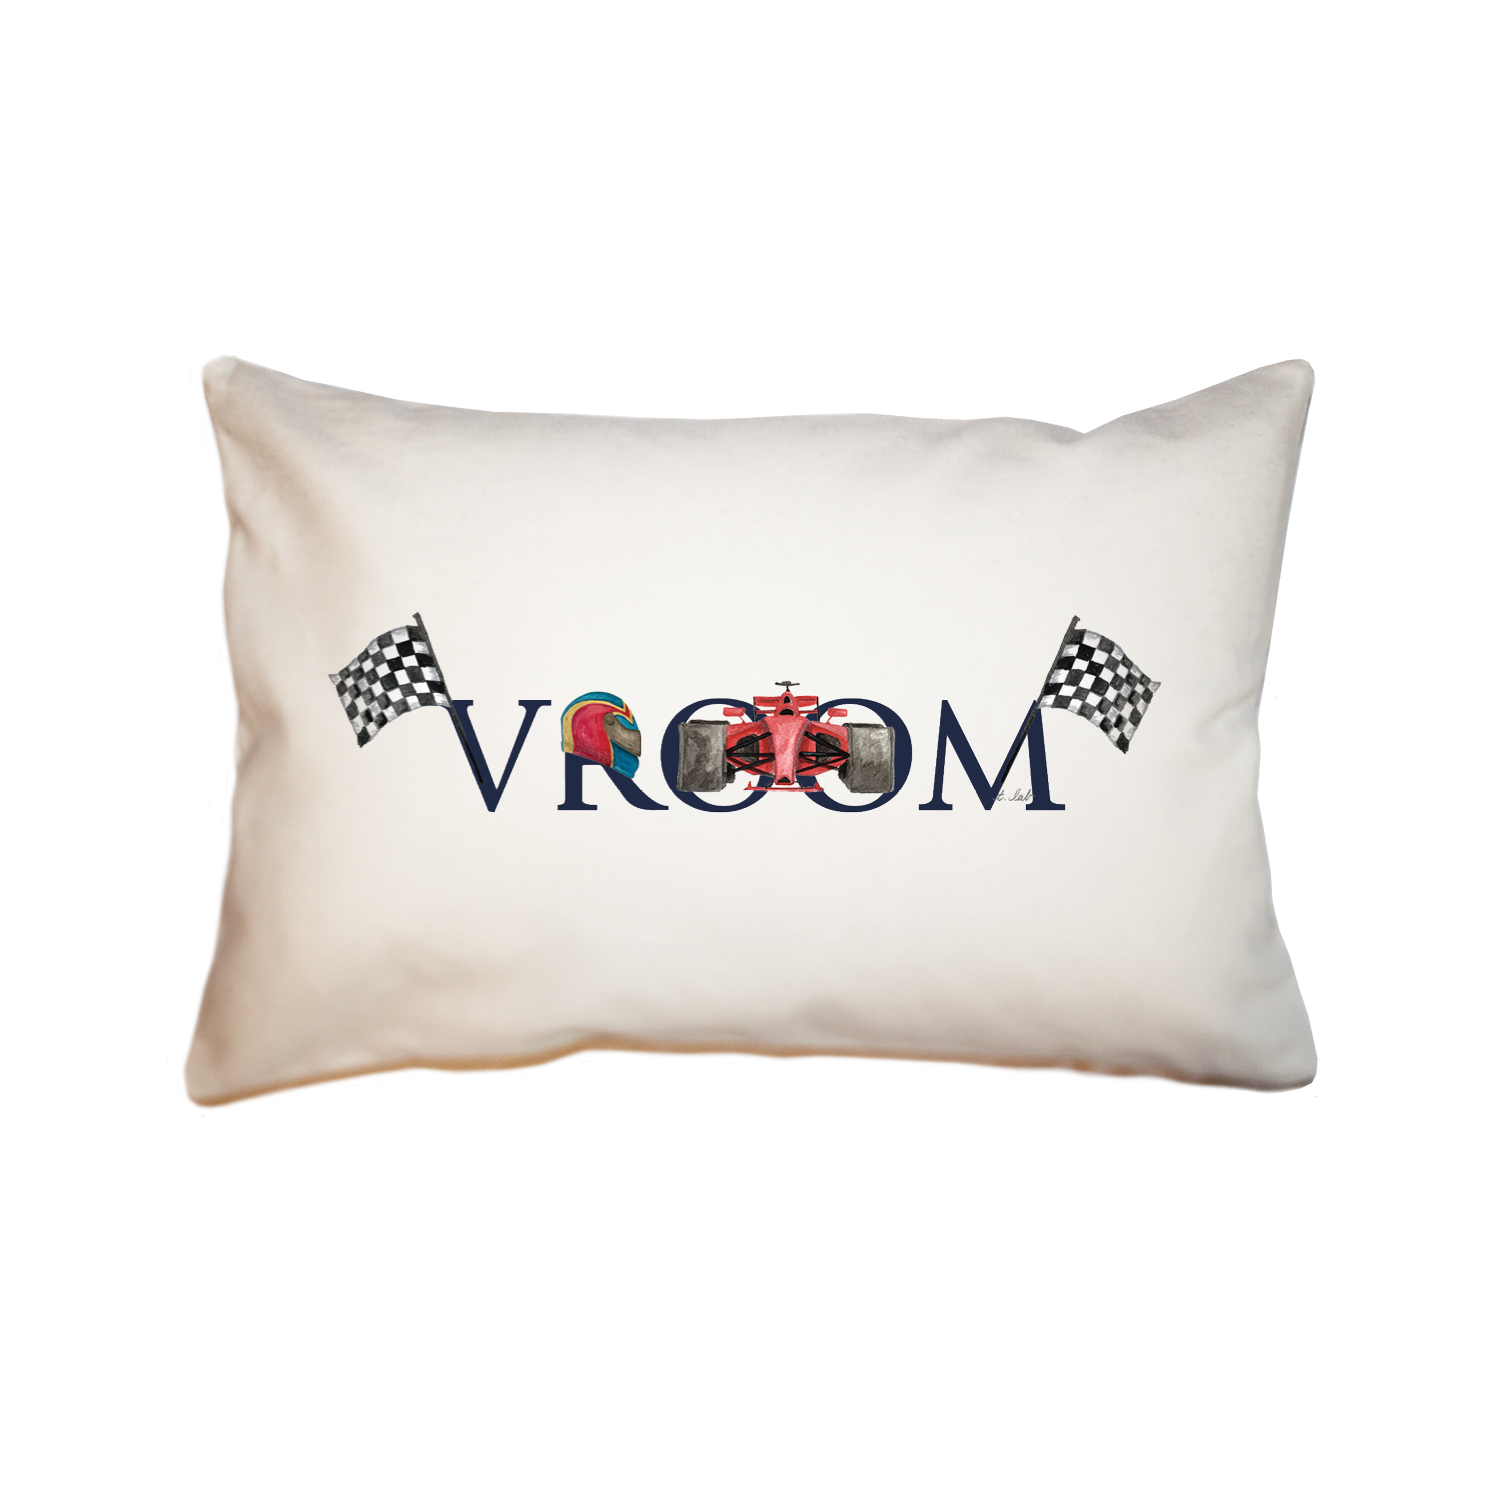 vroom large rectangle pillow